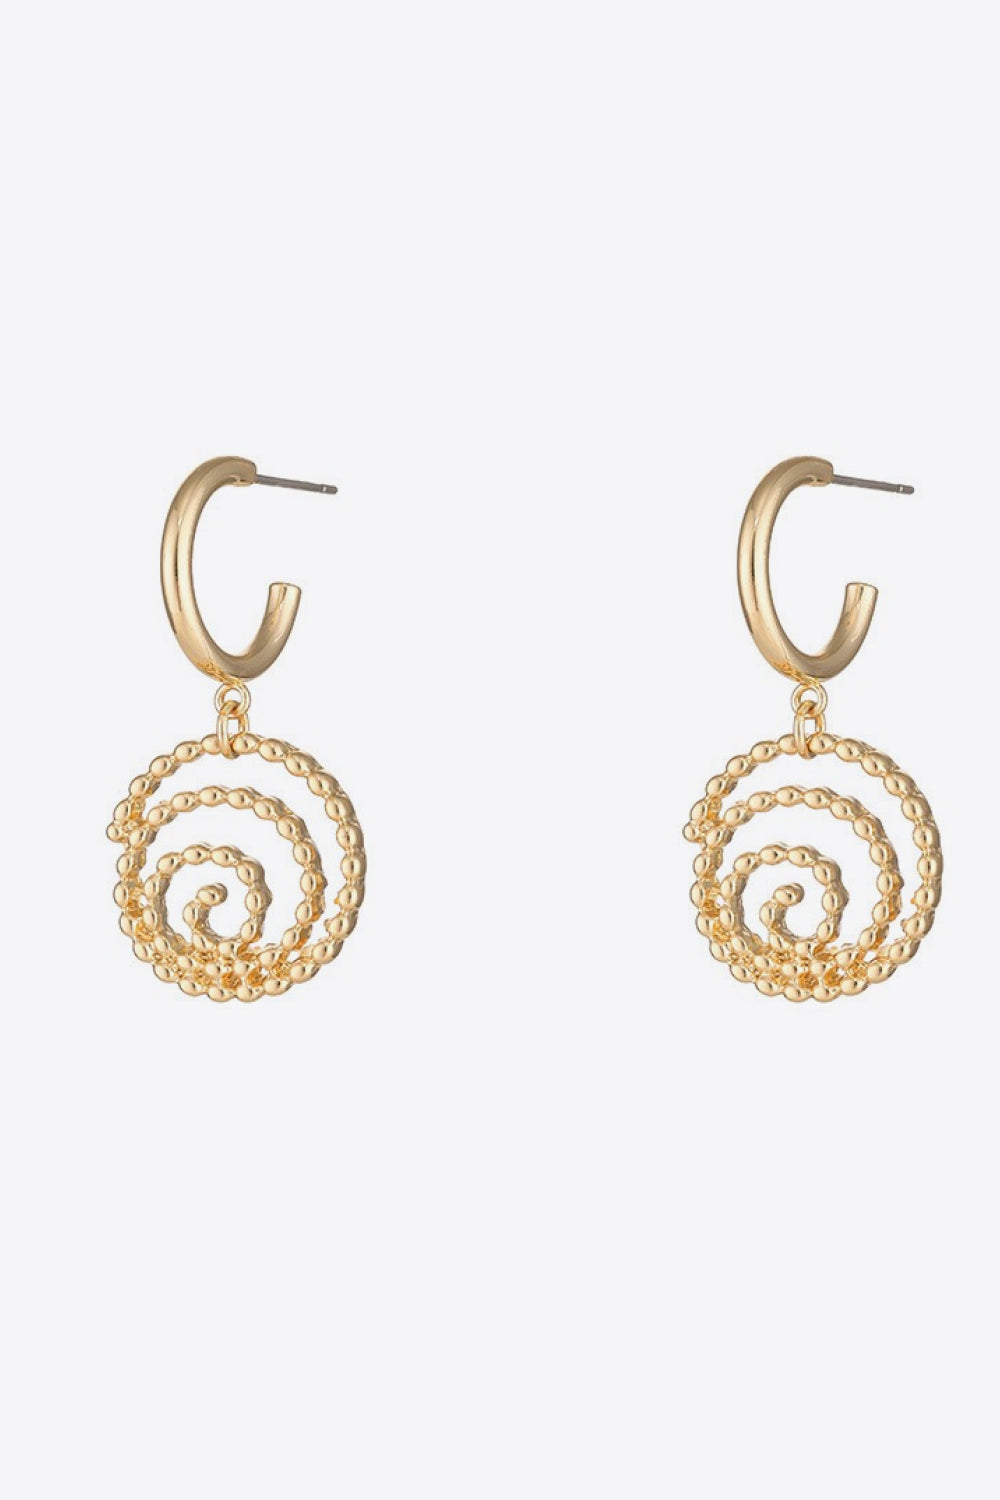 PREORDER- 18K Gold-Plated Alloy Spiral Earrings